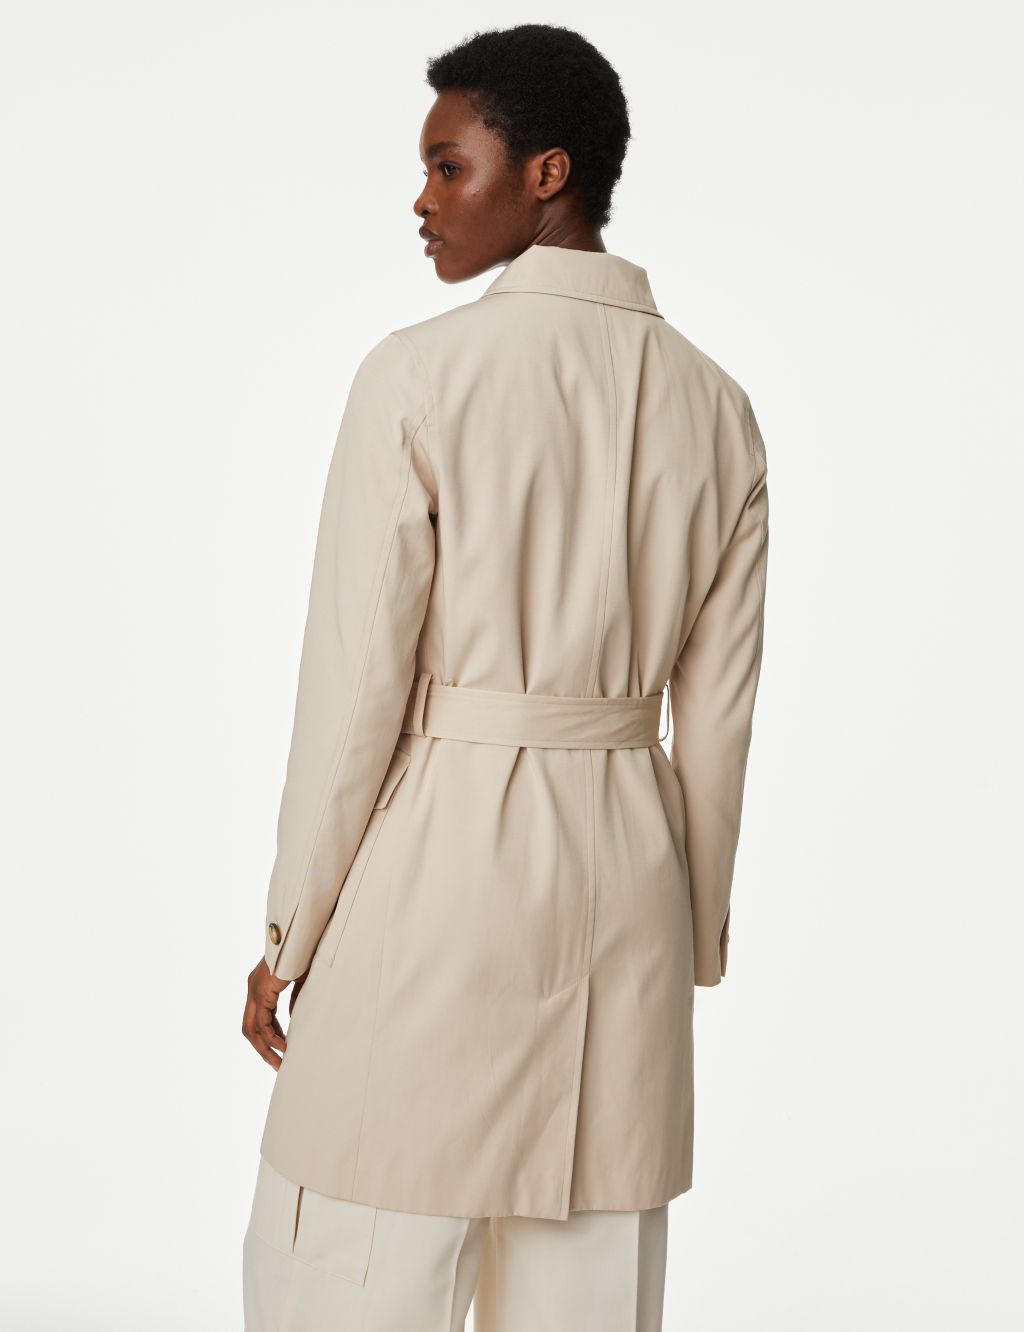 Stormwear™ Belted Single Breasted Trench Coat image 5